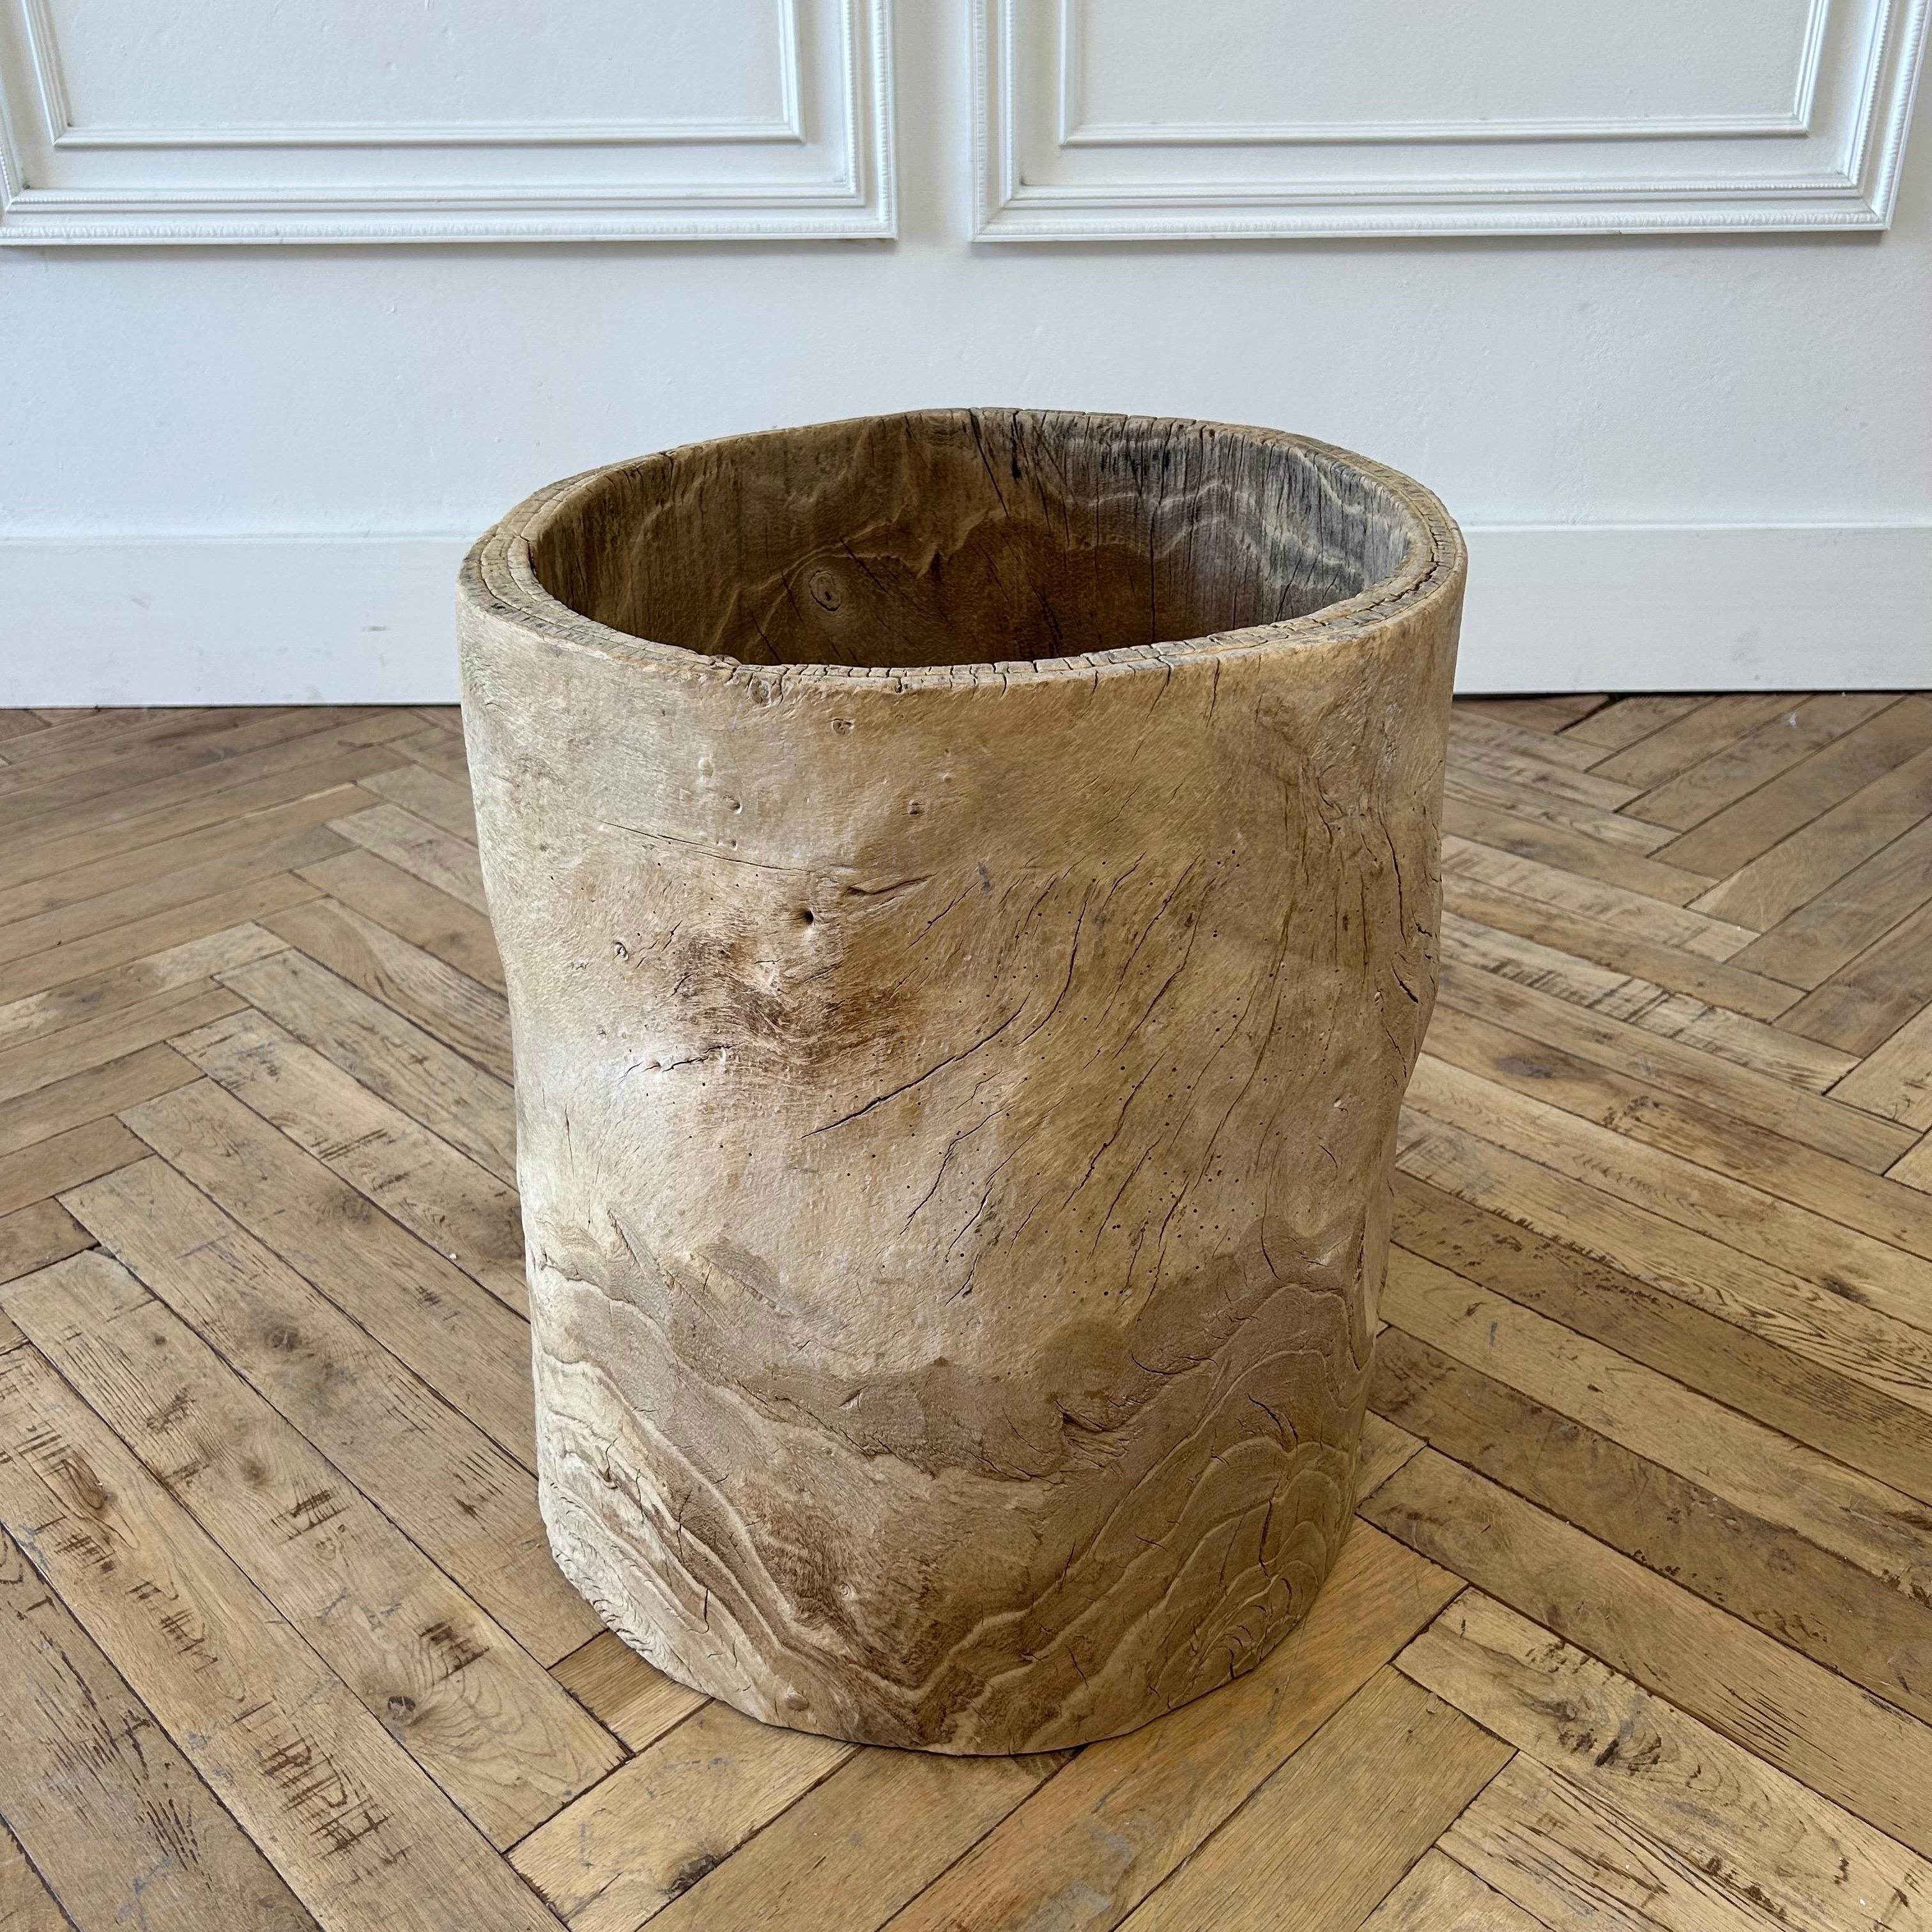 Asian Large Carved Out Stump Decorative Planter